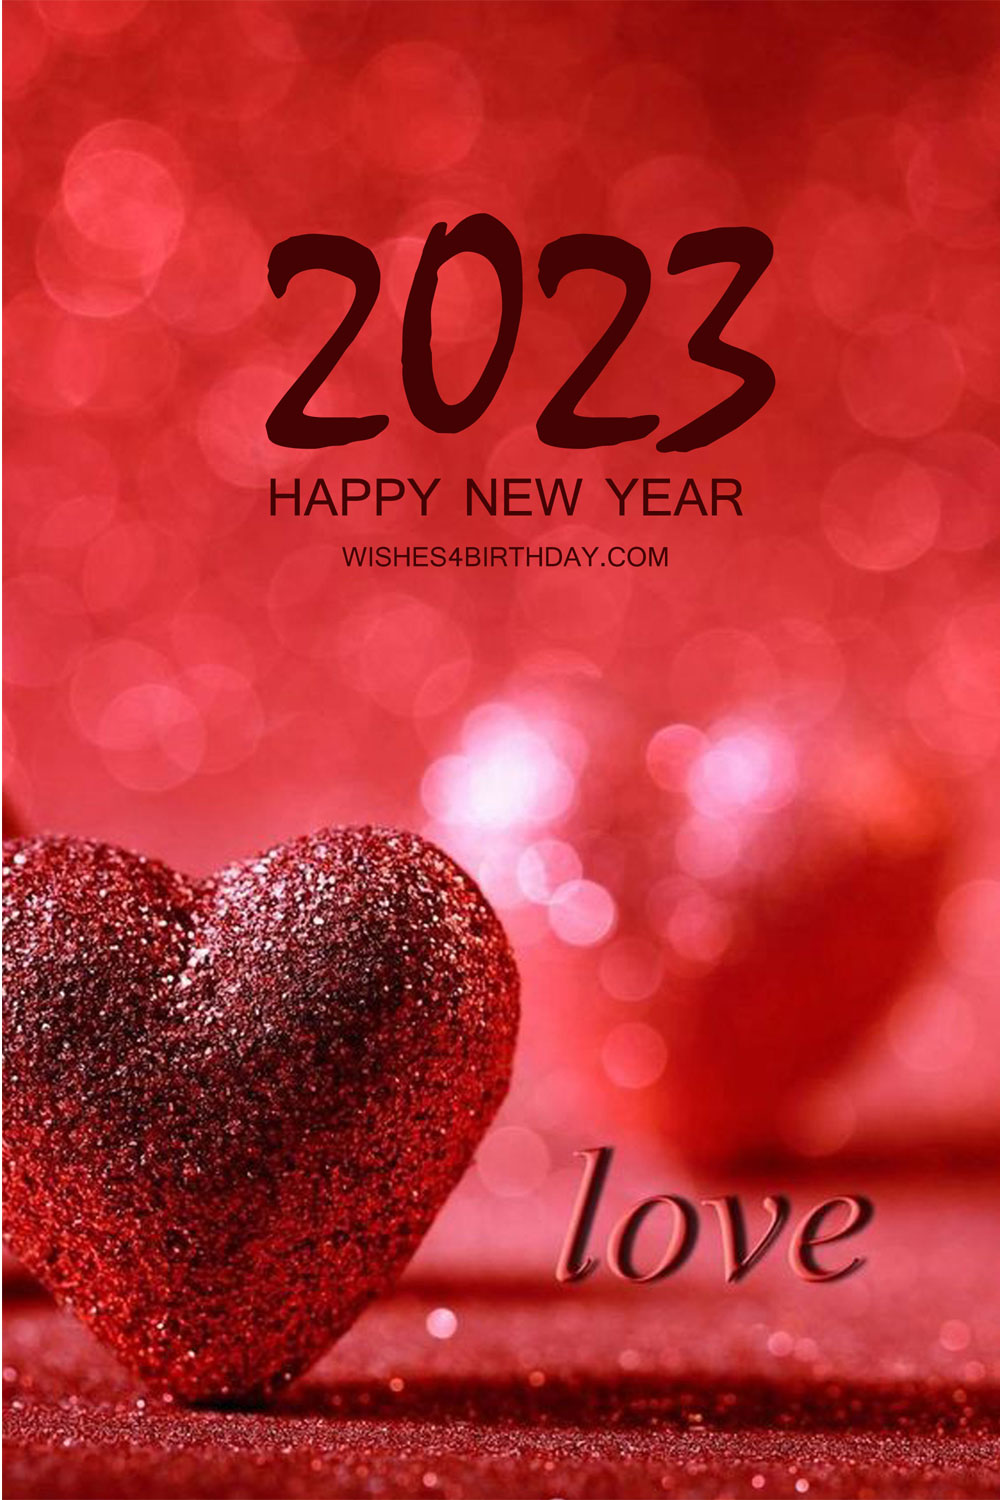 Love At The Heart With Happy New Year Images 2023 - Happy Birthday ...